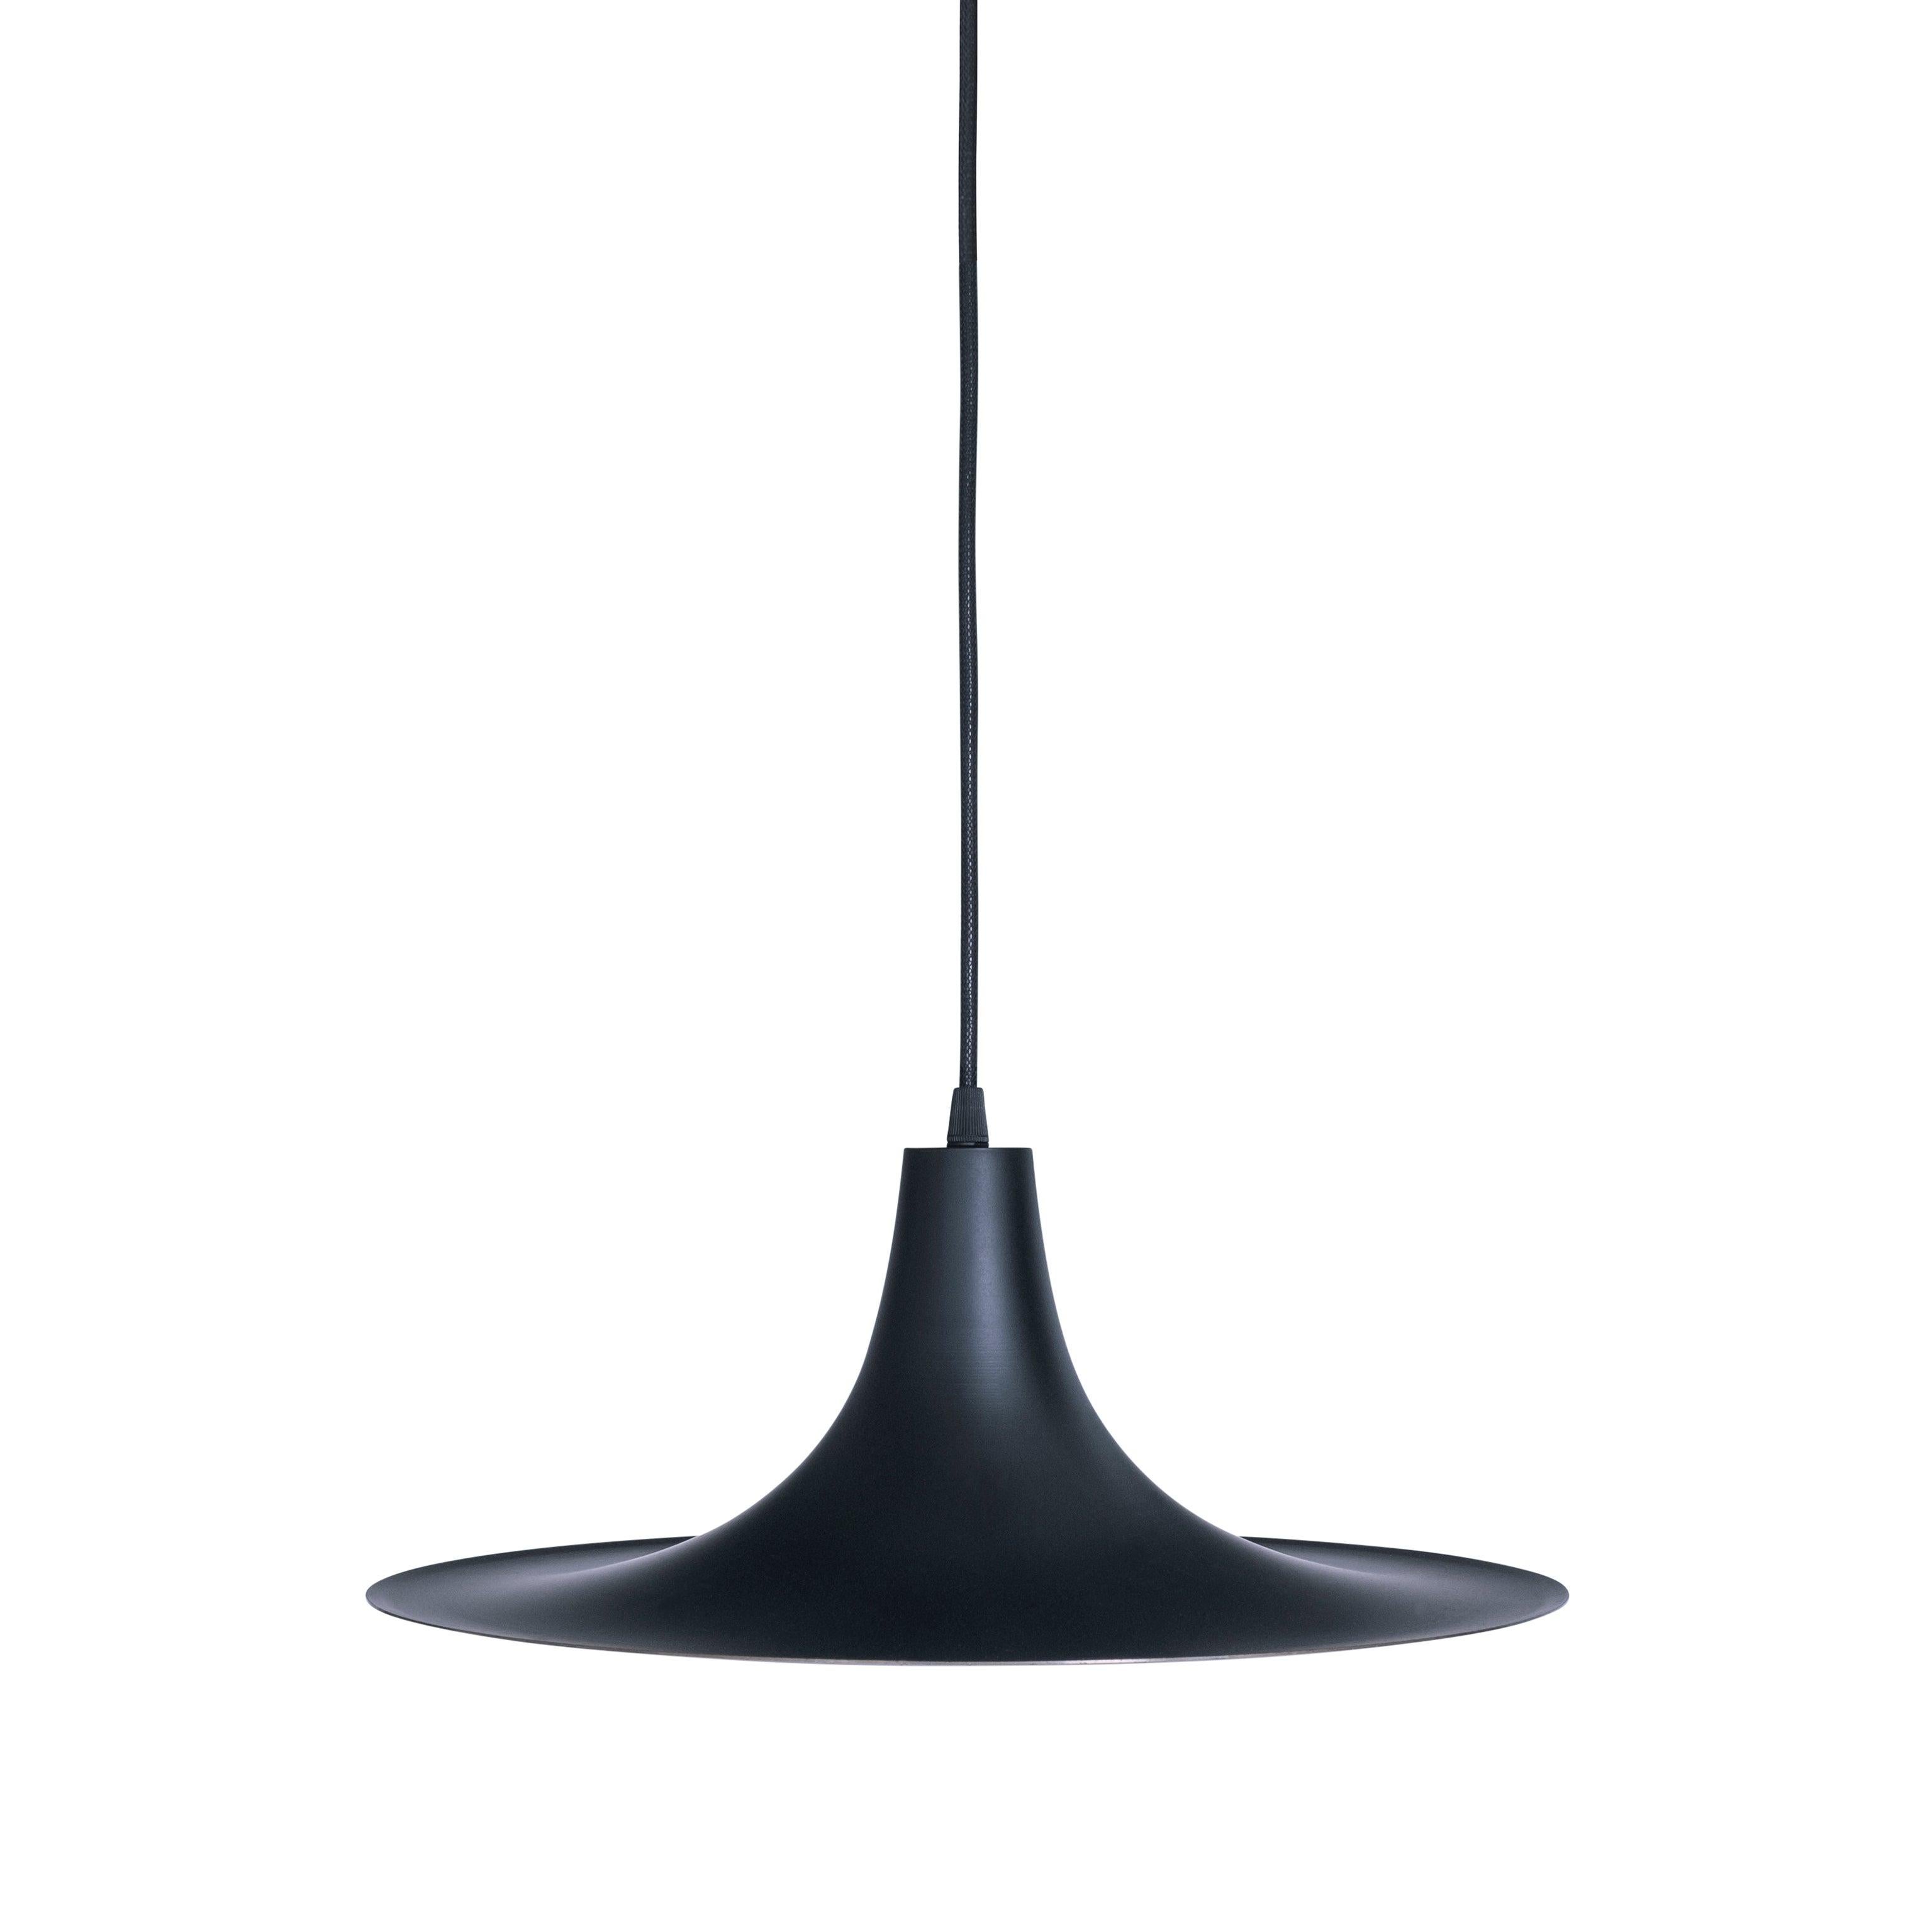 Ceiling lamp model Blackstar designed by Jesper Ståhl and manufactured by Konsthantverk.

The production of lamps, wall lights and floor lamps are manufactured using craftsman’s techniques with the same materials and techniques as the first